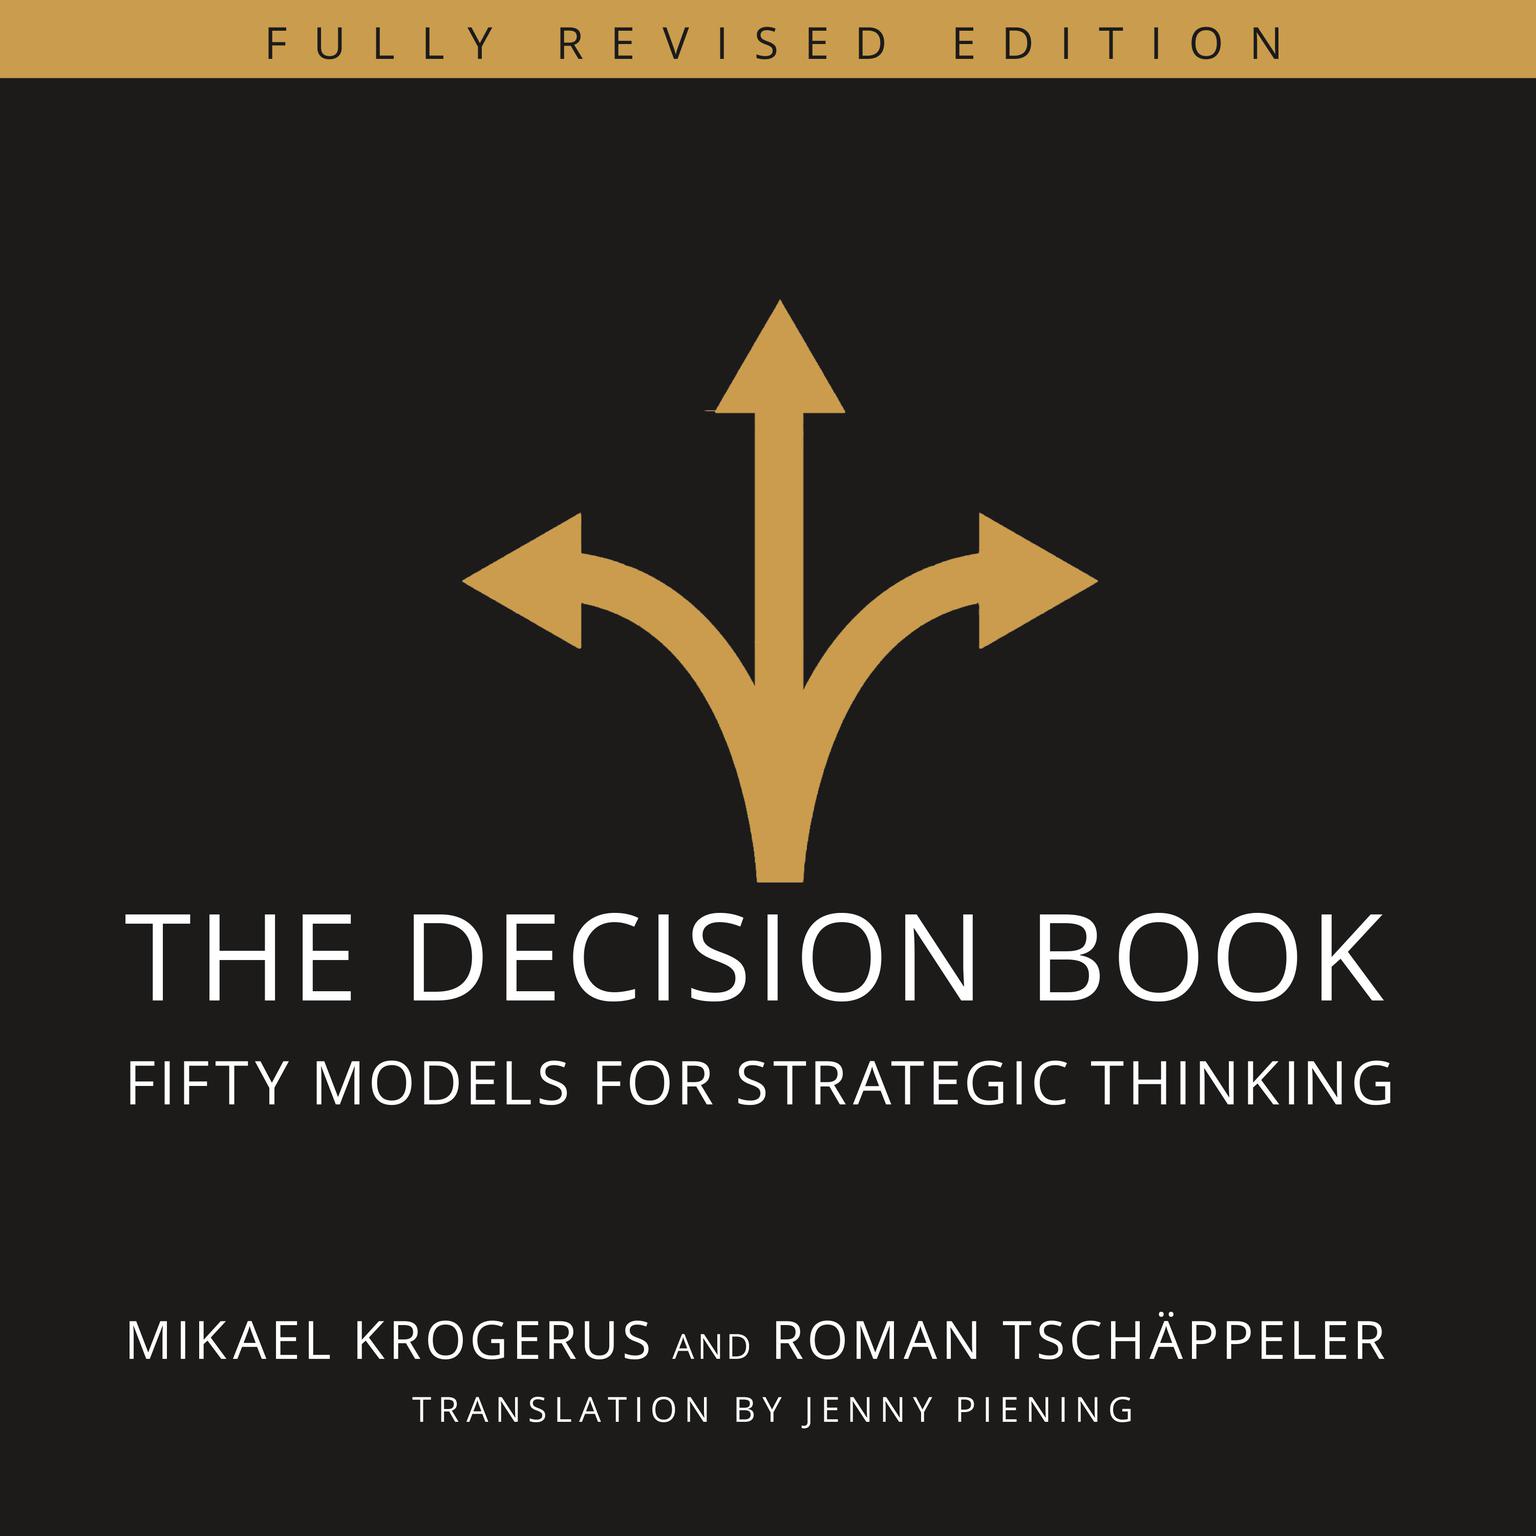 The Decision Book: Fifty Models for Strategic Thinking (Fully Revised Edition) Audiobook, by Mikael Krogerus